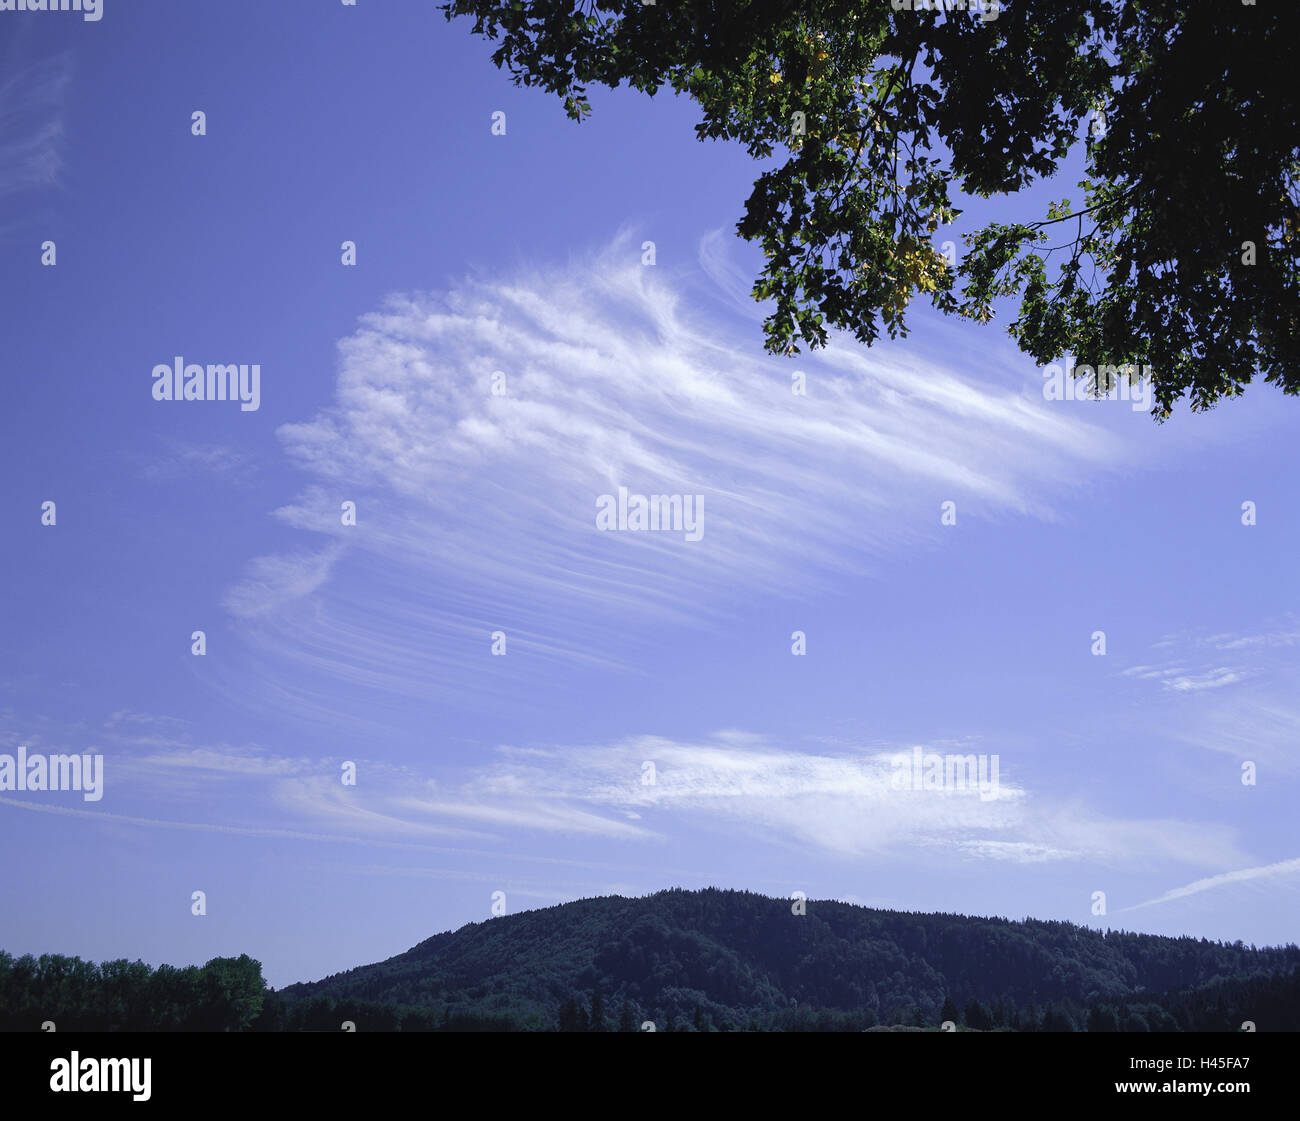 Heaven, clouds, cloud form, Zirruswolken, cloud genus, ice-crystals, ice cream clouds, cirri, Cirrus, Ci, nature, well, deserted, outside, hill, tree, branches, detail, weather, meteorology, Stock Photo